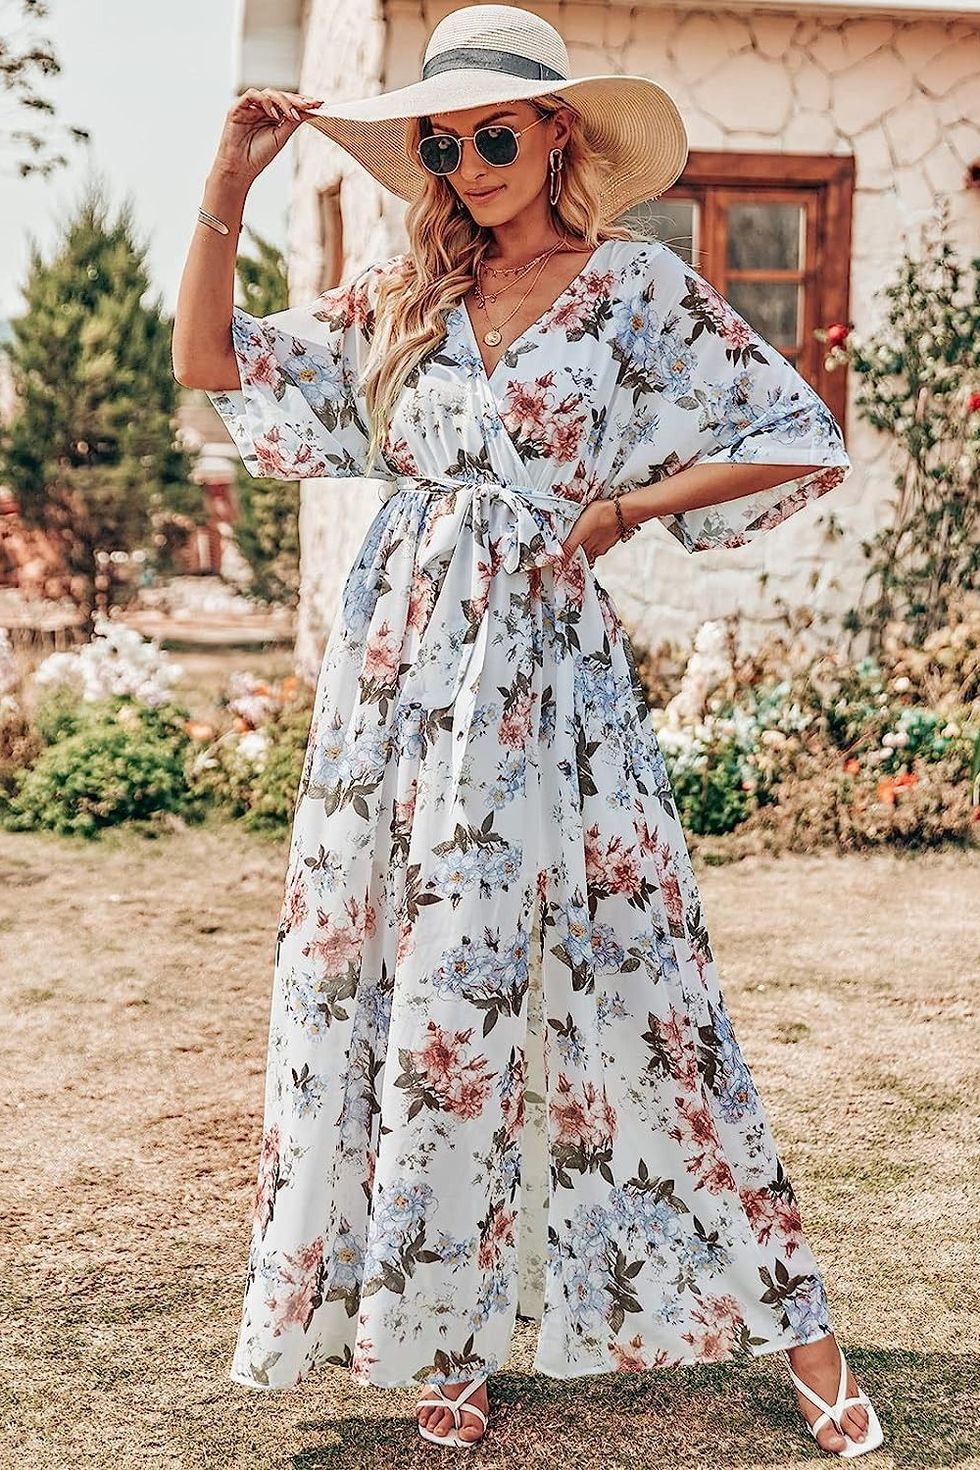 That perfect turquoise bohemian maxi dress for this Summer.